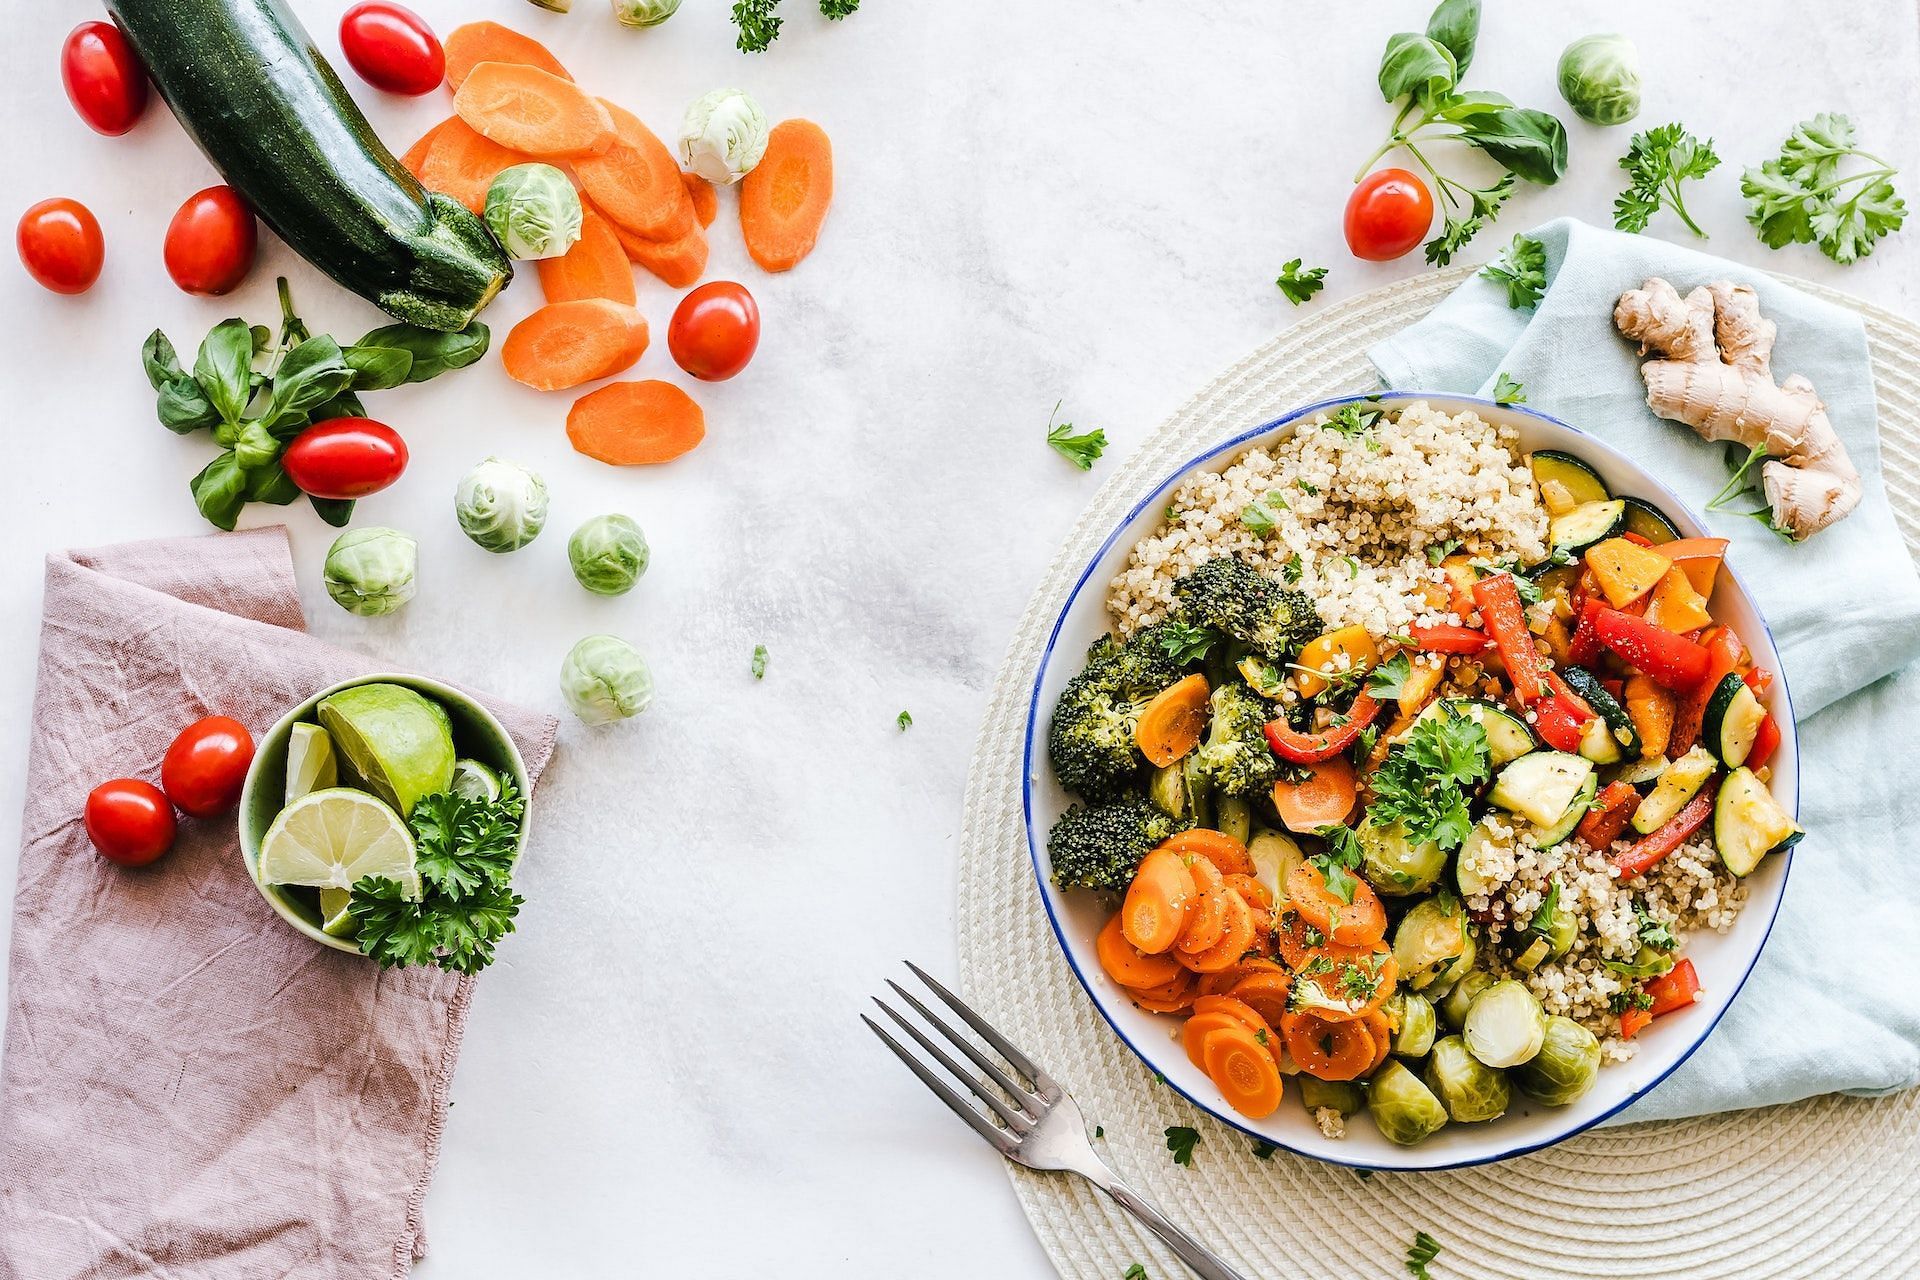 Foods good for the kidneys include several vegetables and fruits. (Photo via Pexels/Ella Olsson)